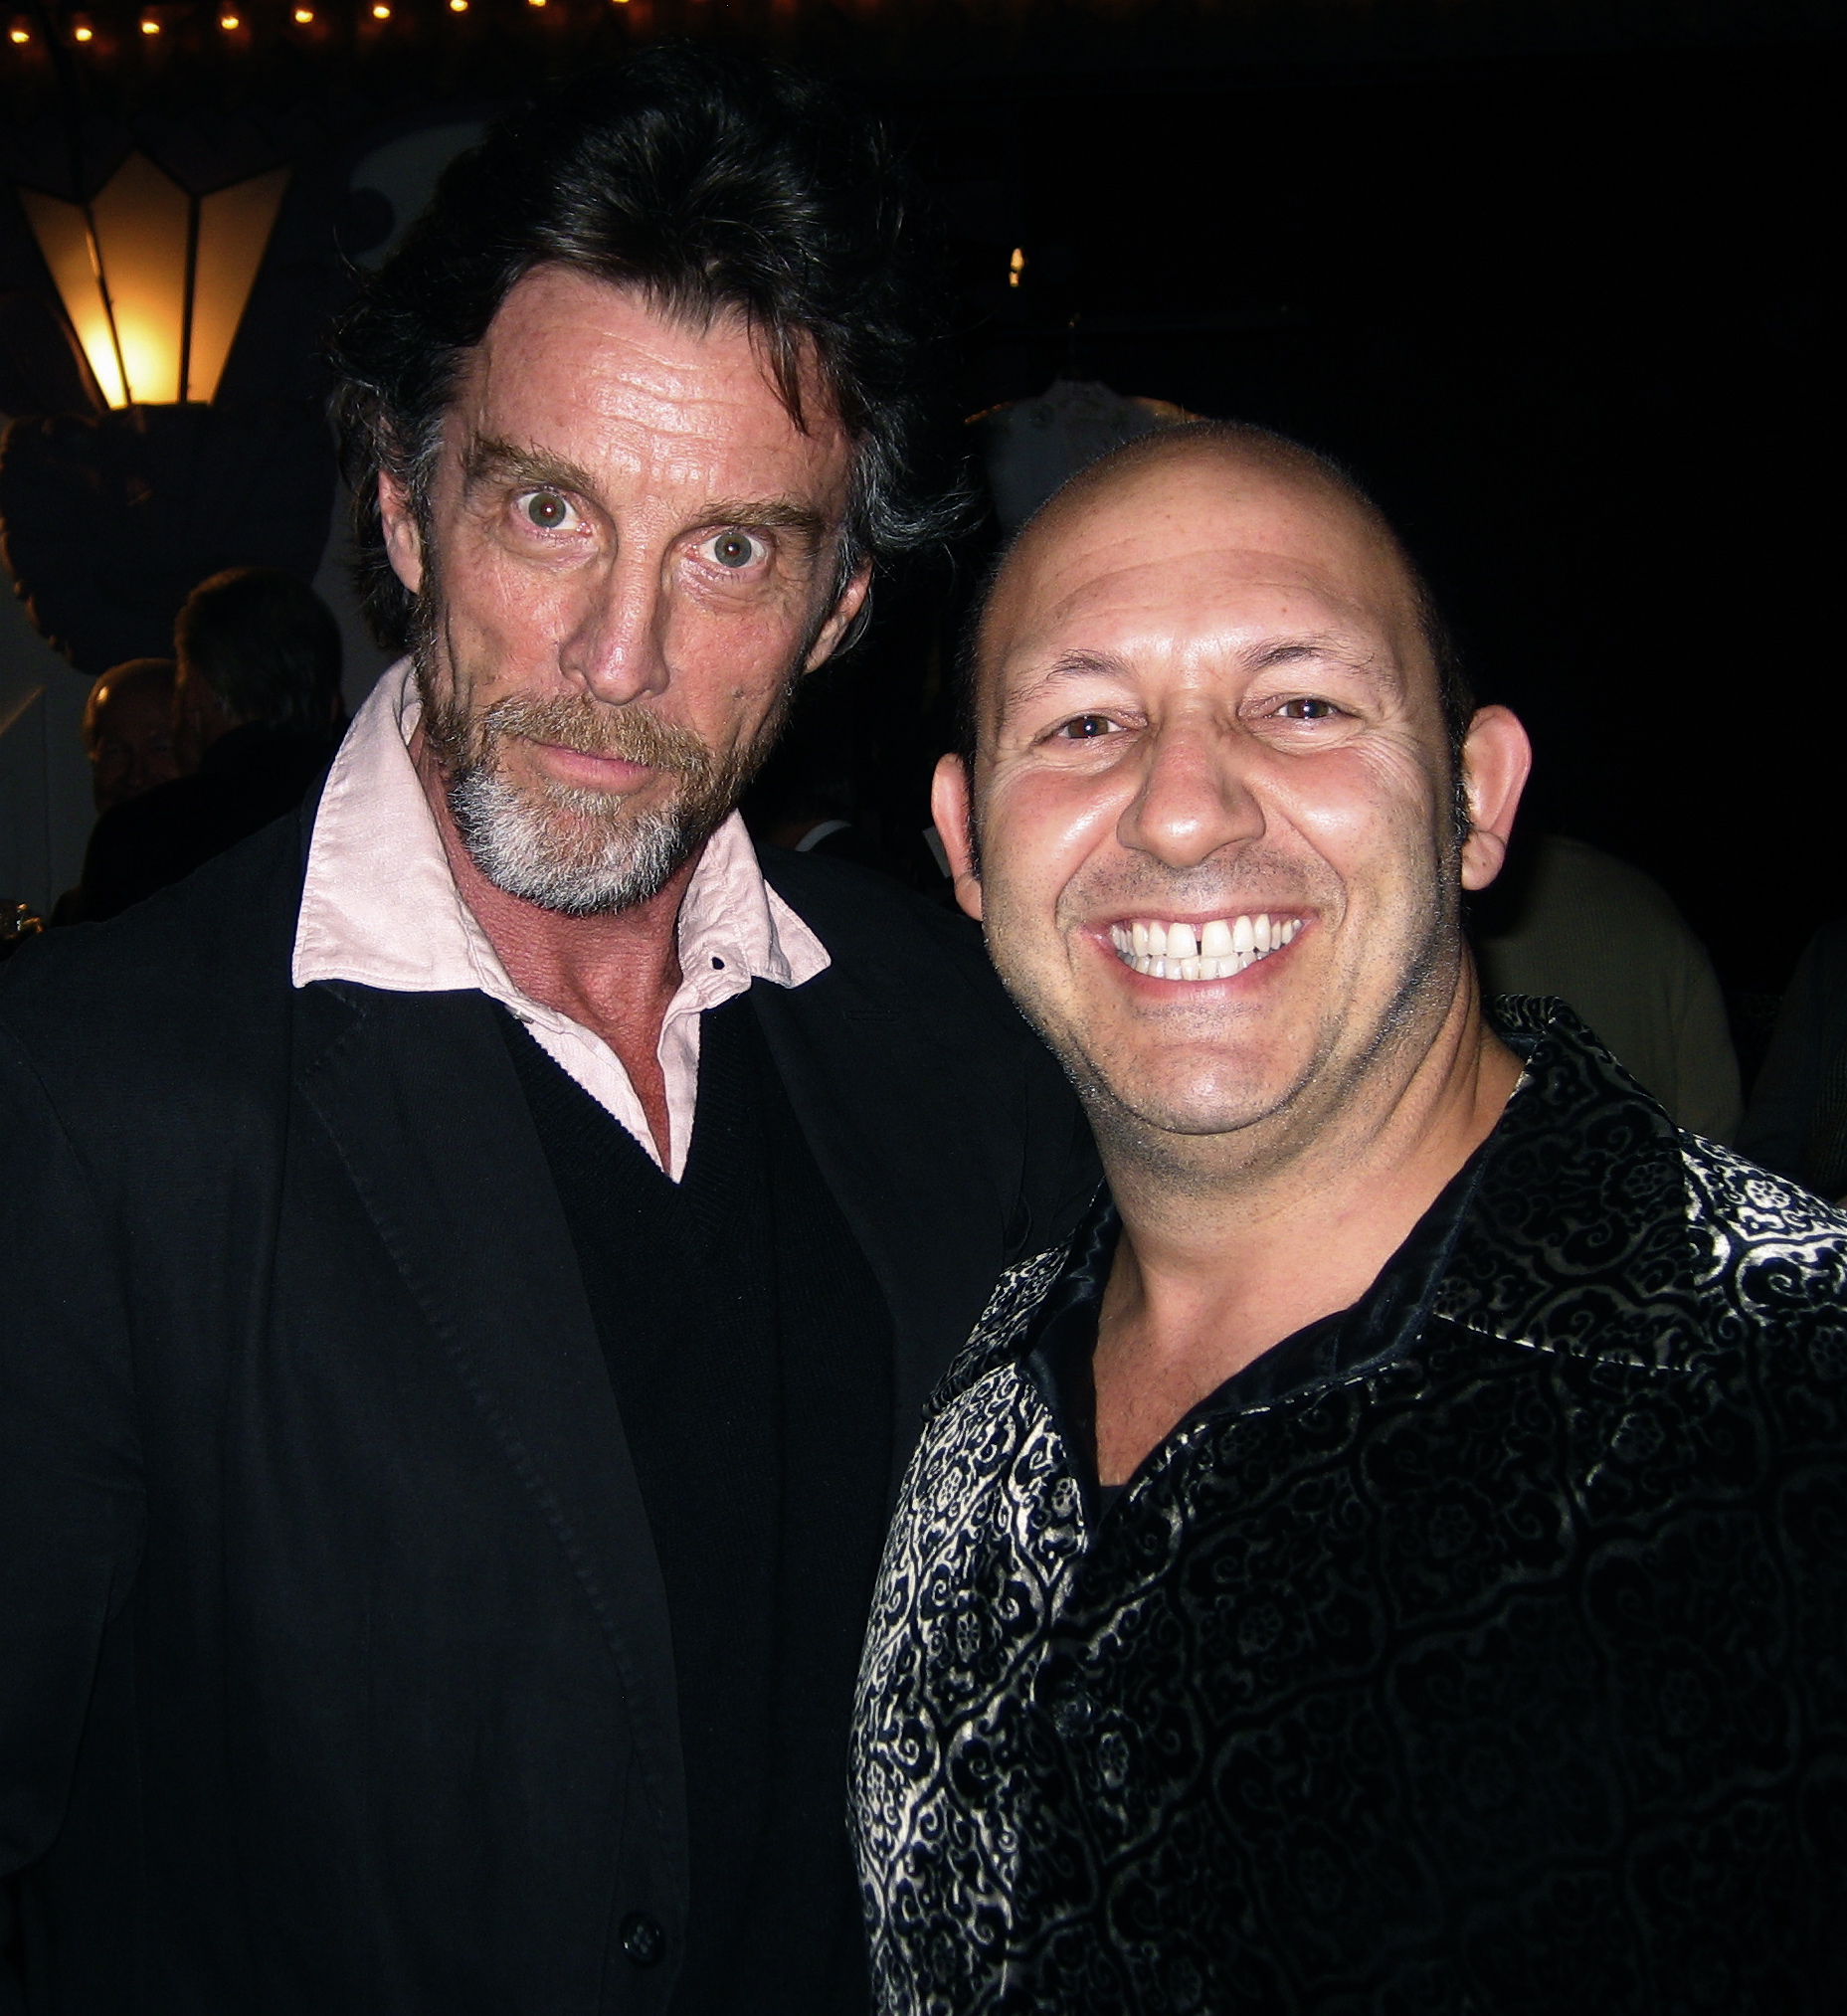 With John Glover at the Doris Roberts Tribute. Met both John and Doris while we all studied with Milton Katselas. An amazing actor, dedicated professional & passionate about his work. An honor and privilege to be in Milton Katselas' class with John.